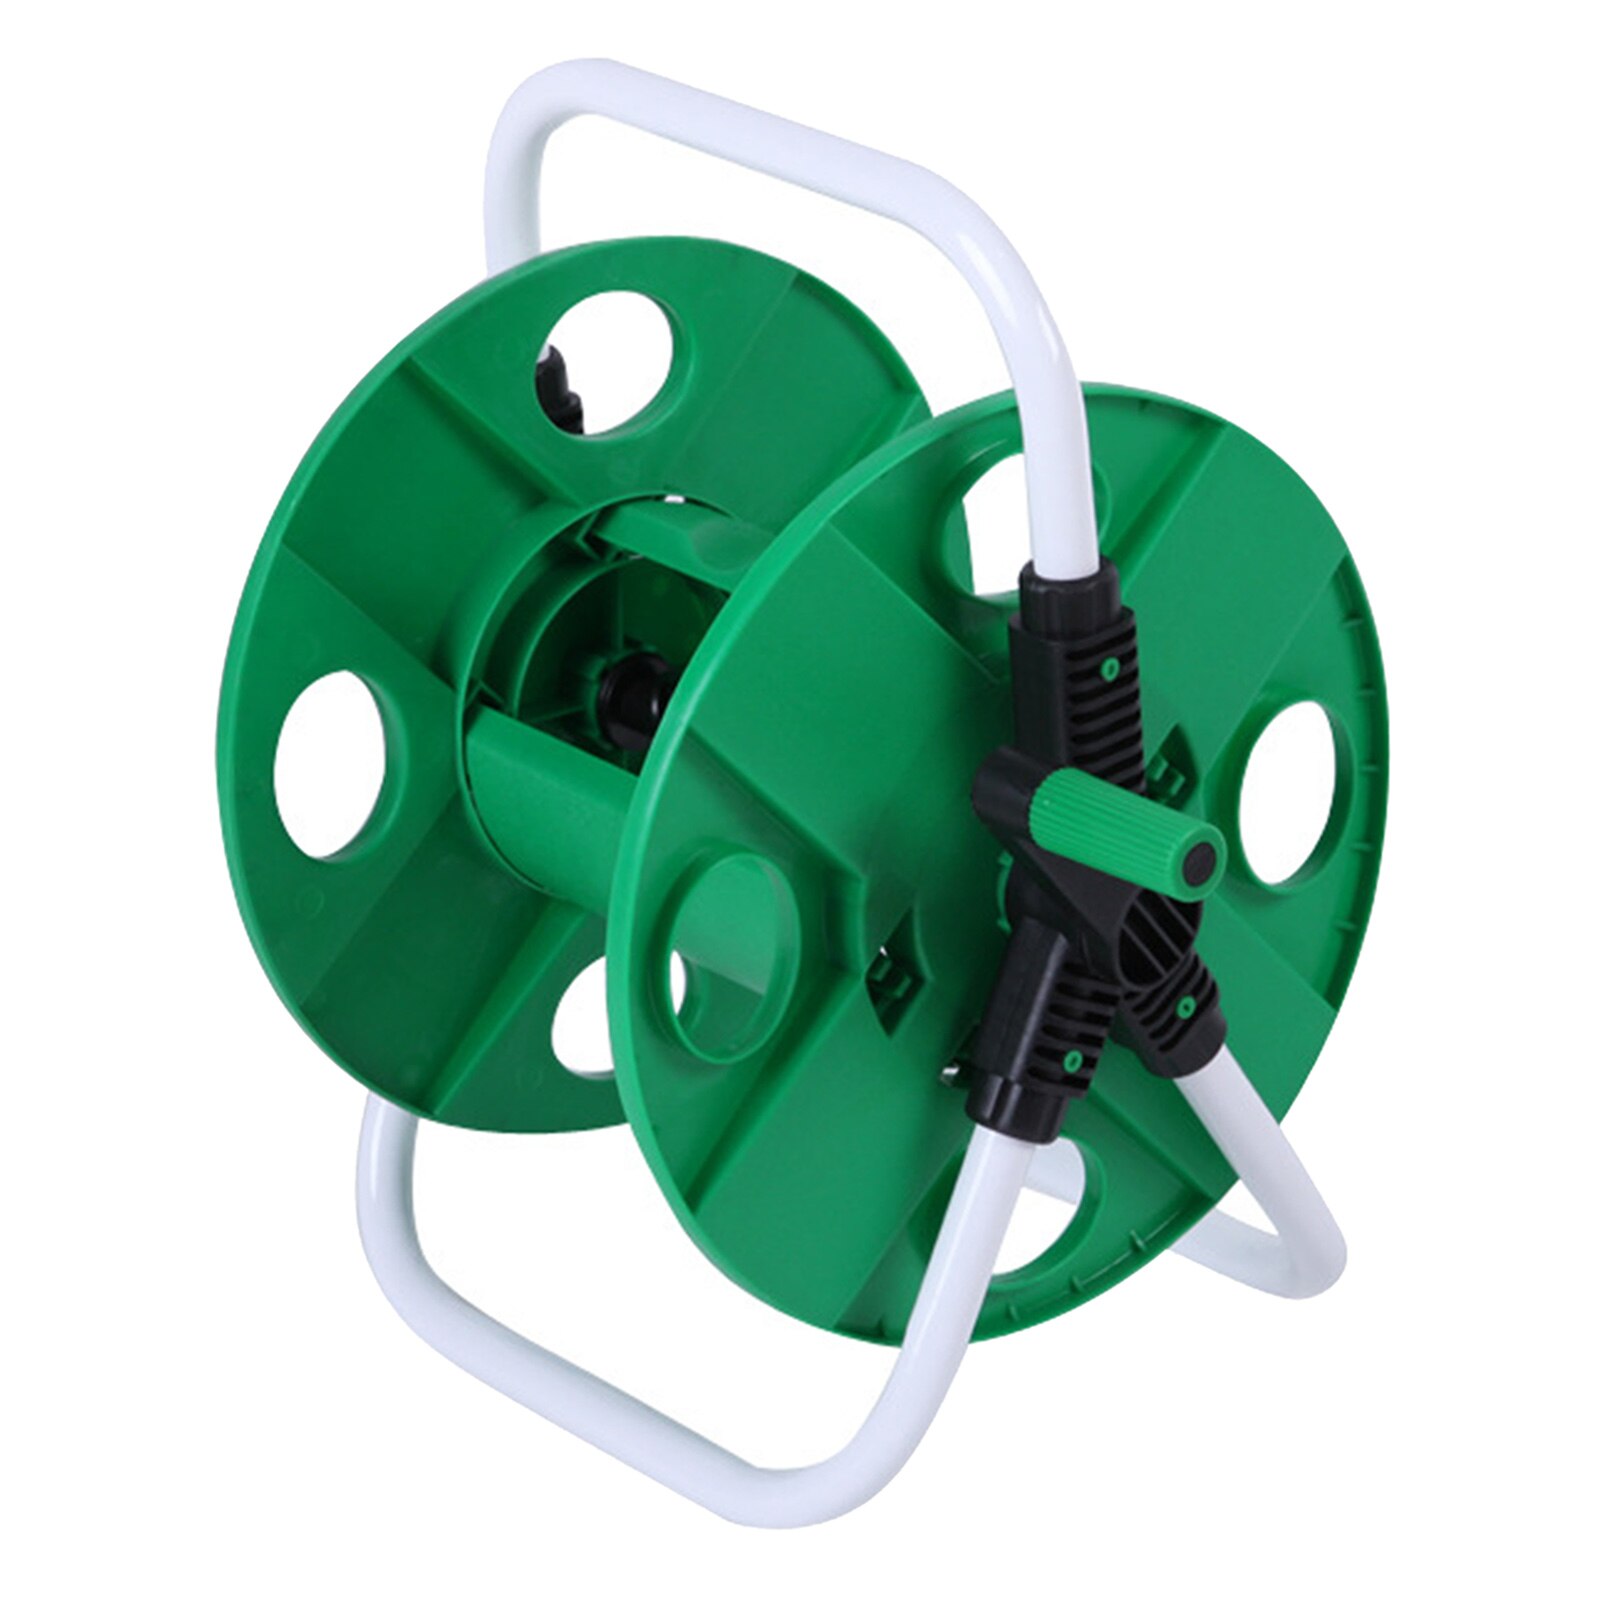 Garden Hose Pipe Reel Holder Cart Free Standing Home Greenhouse Outdoor Tools Accessory Save Space Water Irrigation Supplies